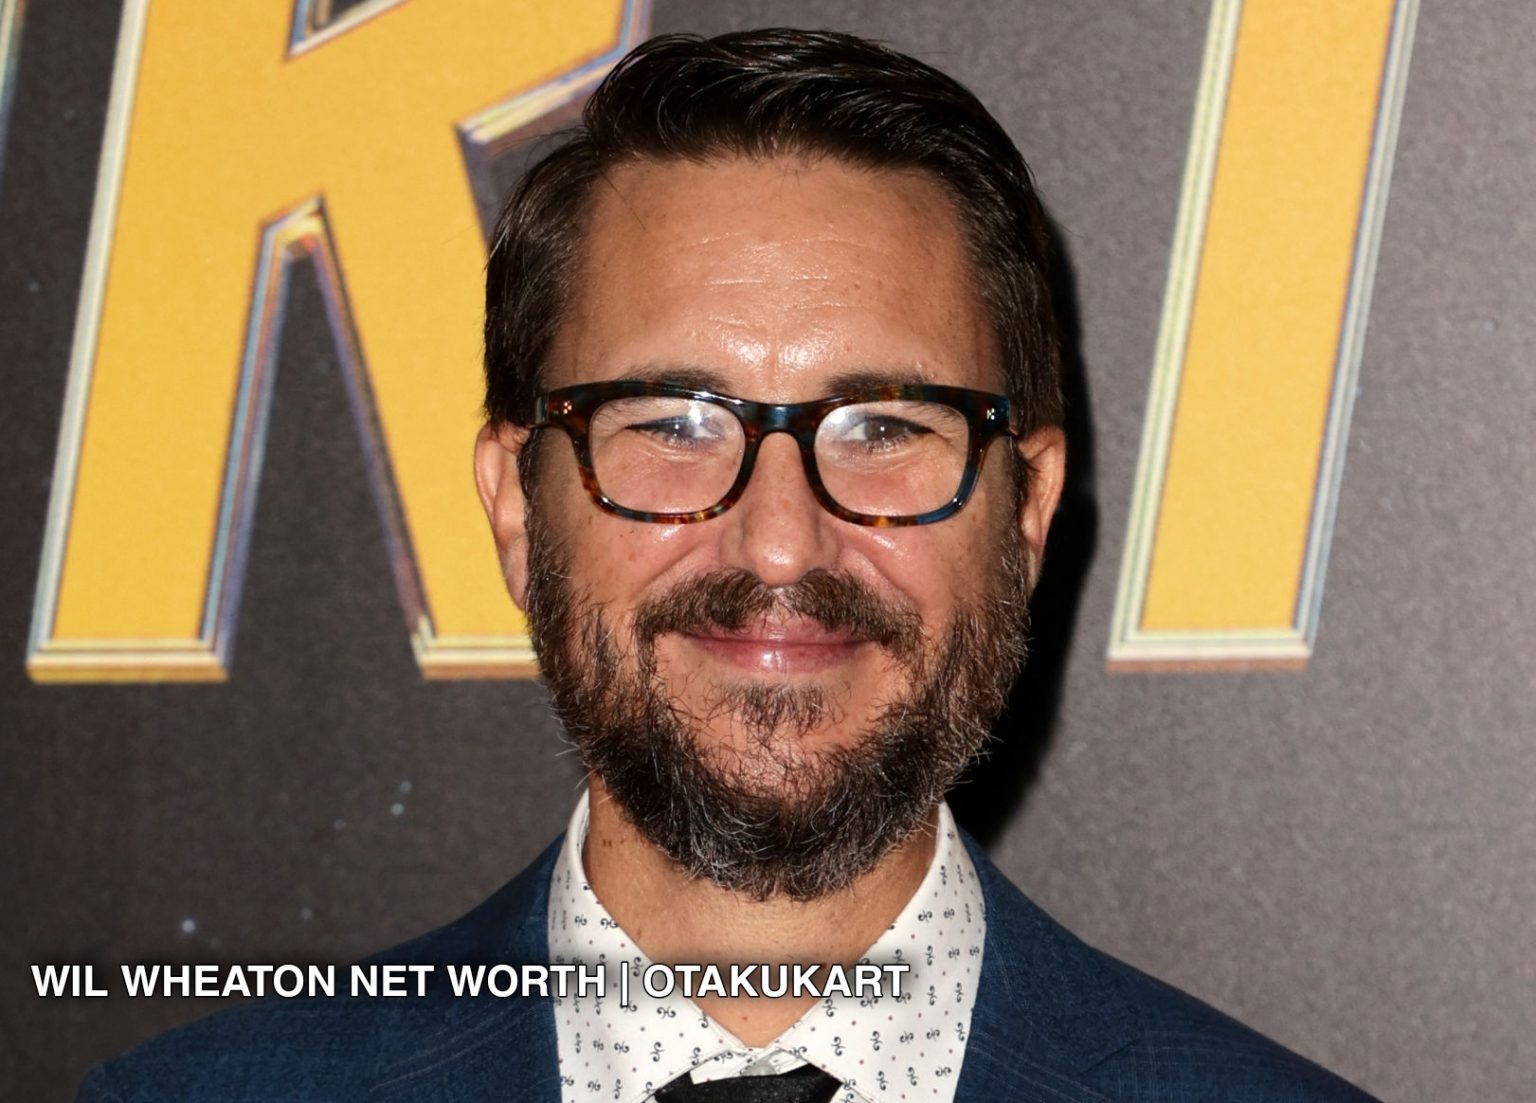 Wil Wheaton Net Worth How Much Does The 'Star Trek' Actor Earn